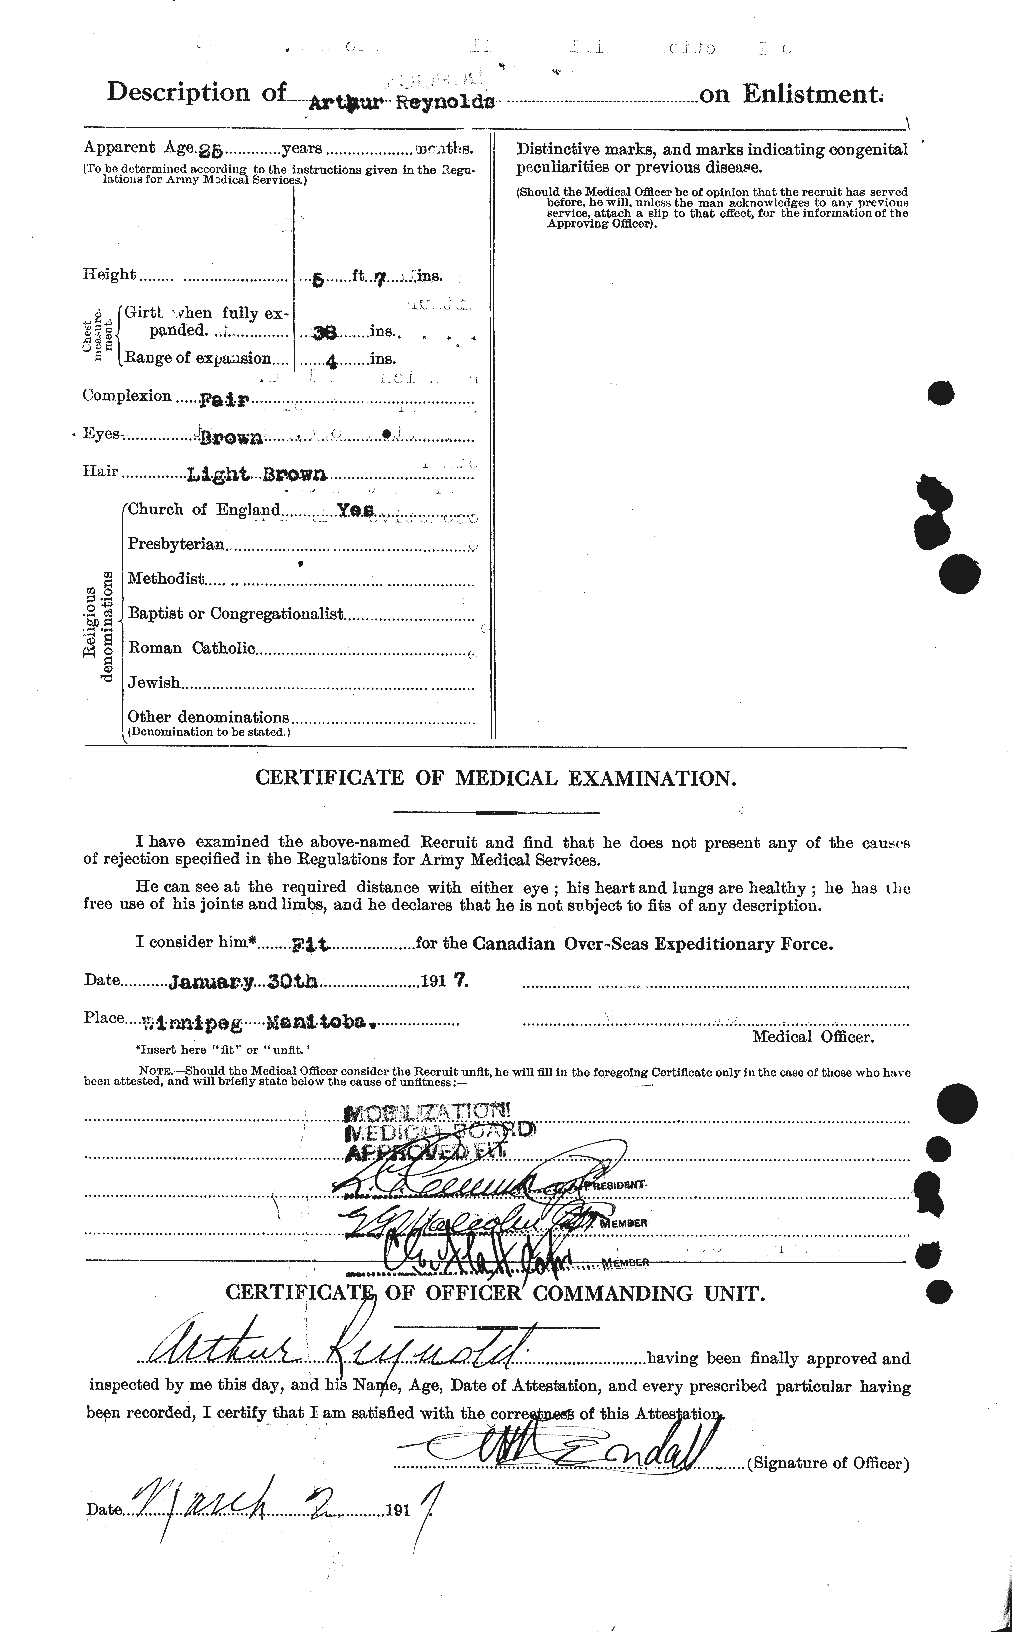 Personnel Records of the First World War - CEF 599079b